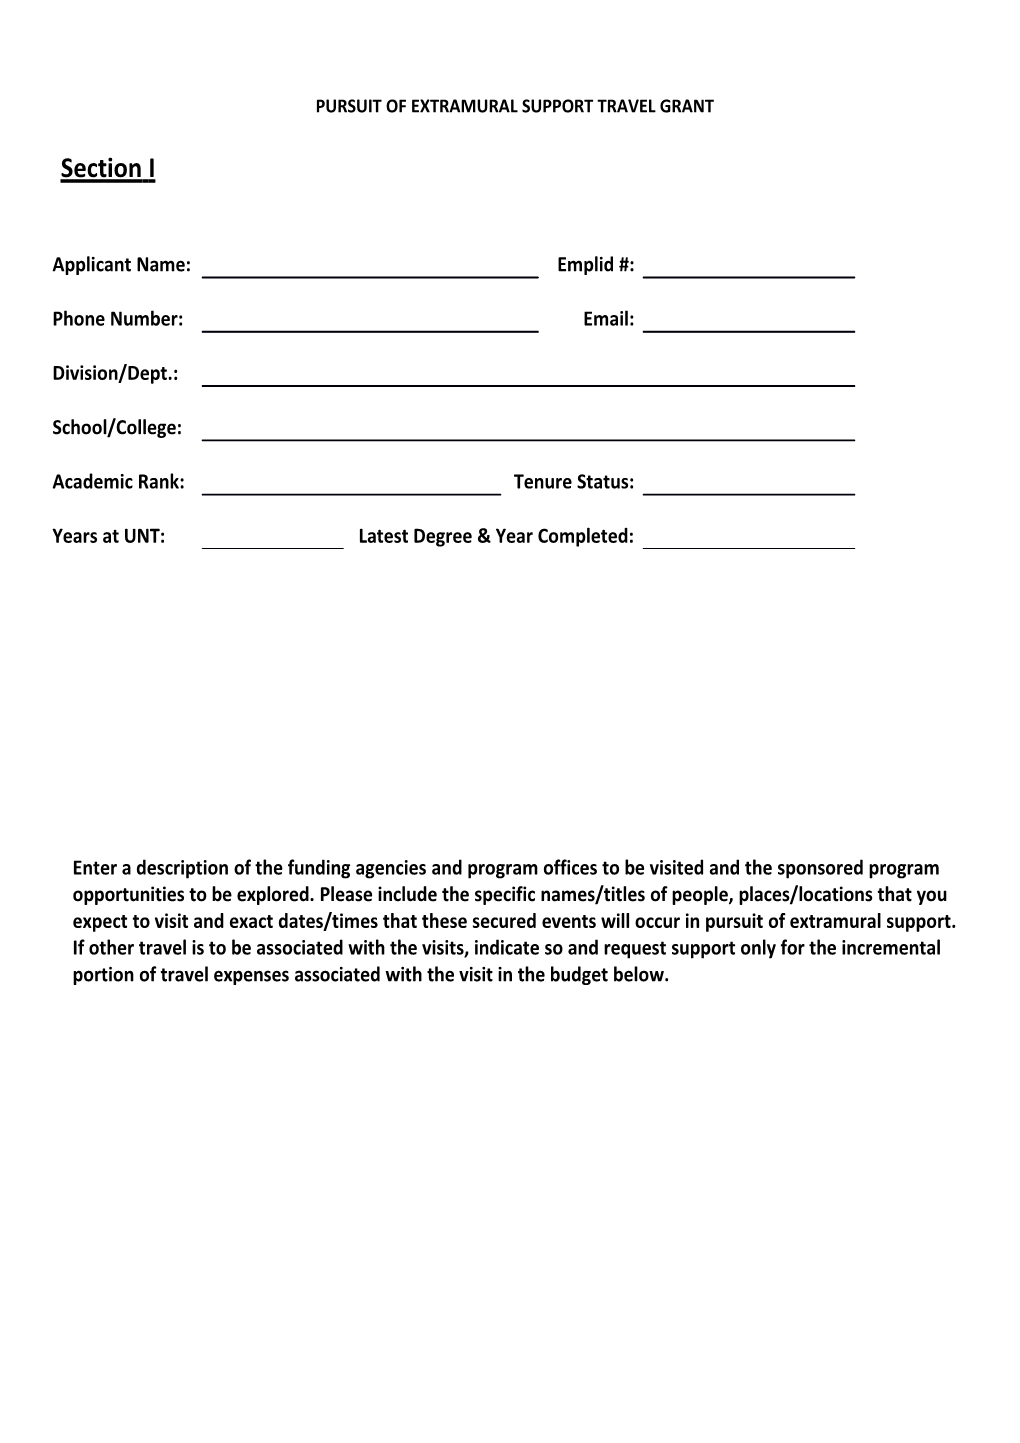 ORED PEST Instructions and Application - Version 9-11-14